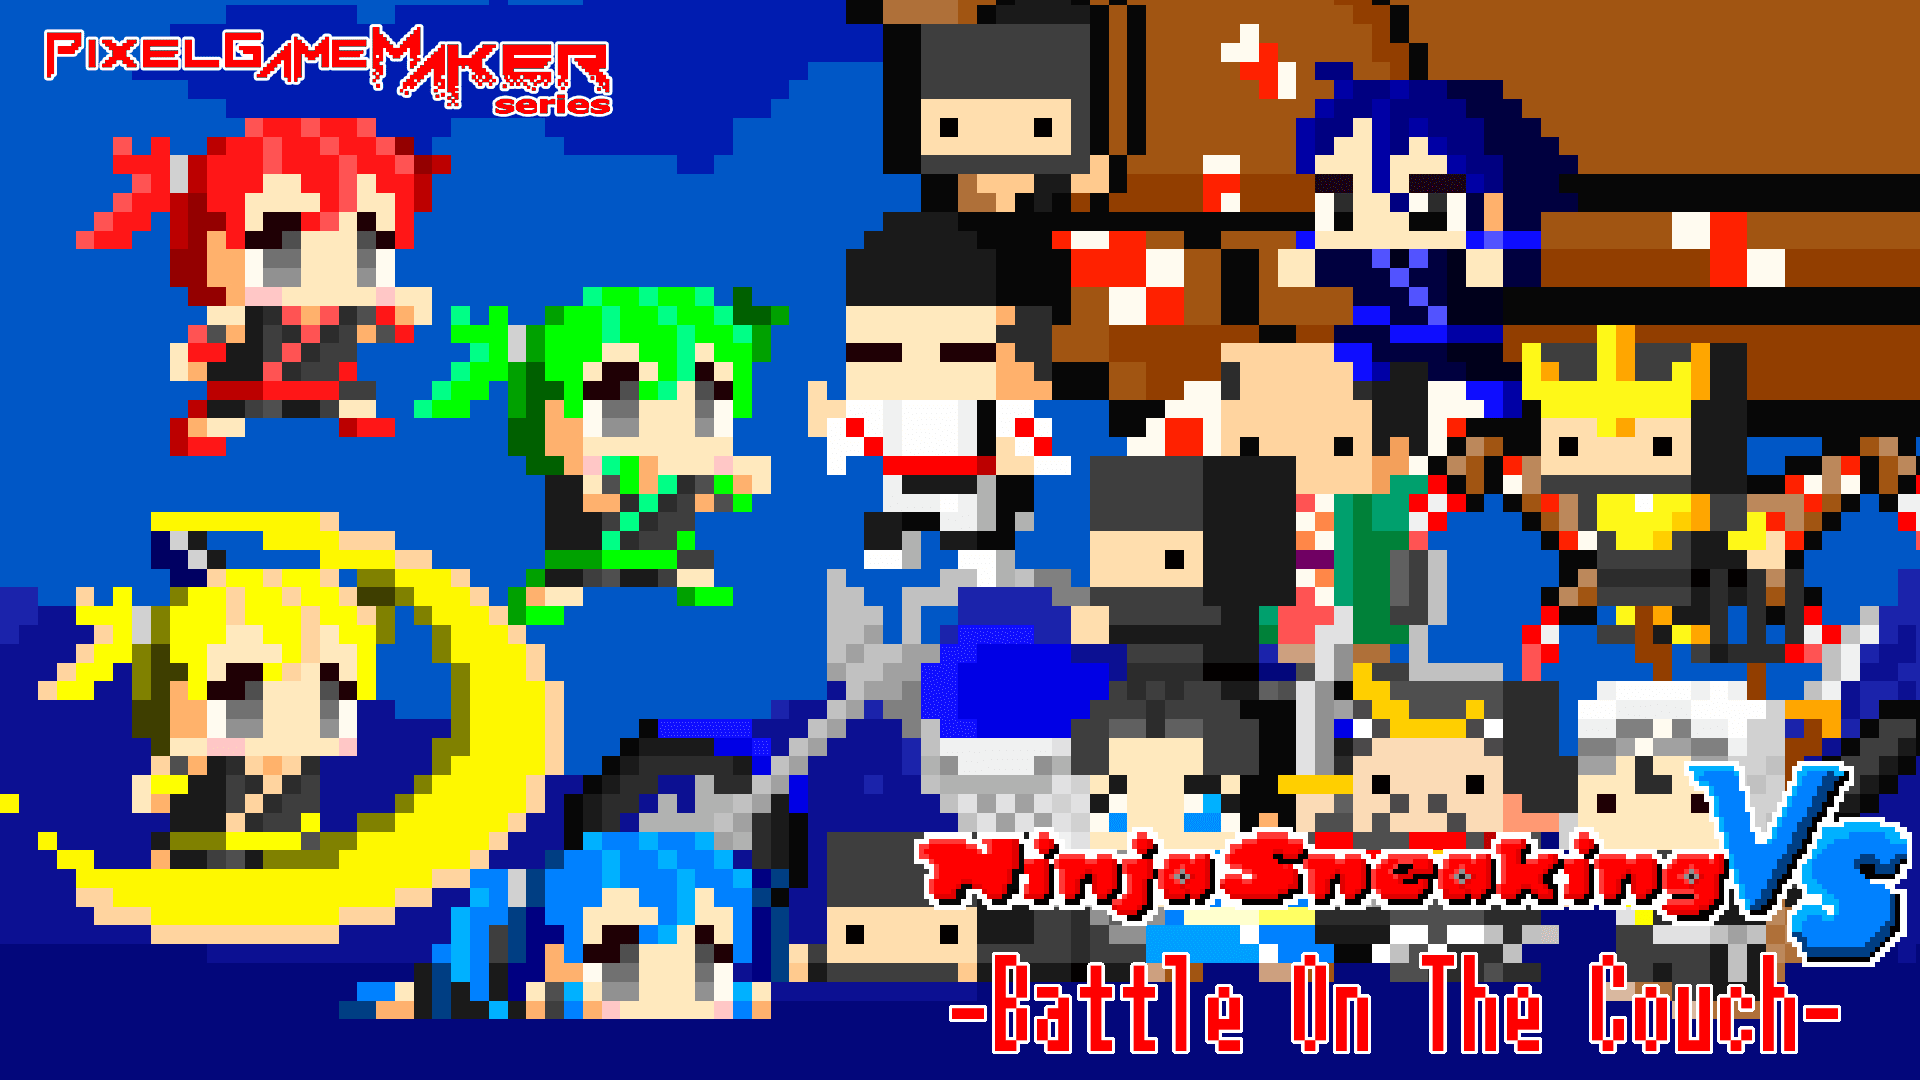 Pixel Game Maker Series Ninja Sneaking VS: Battle On The Couch 1